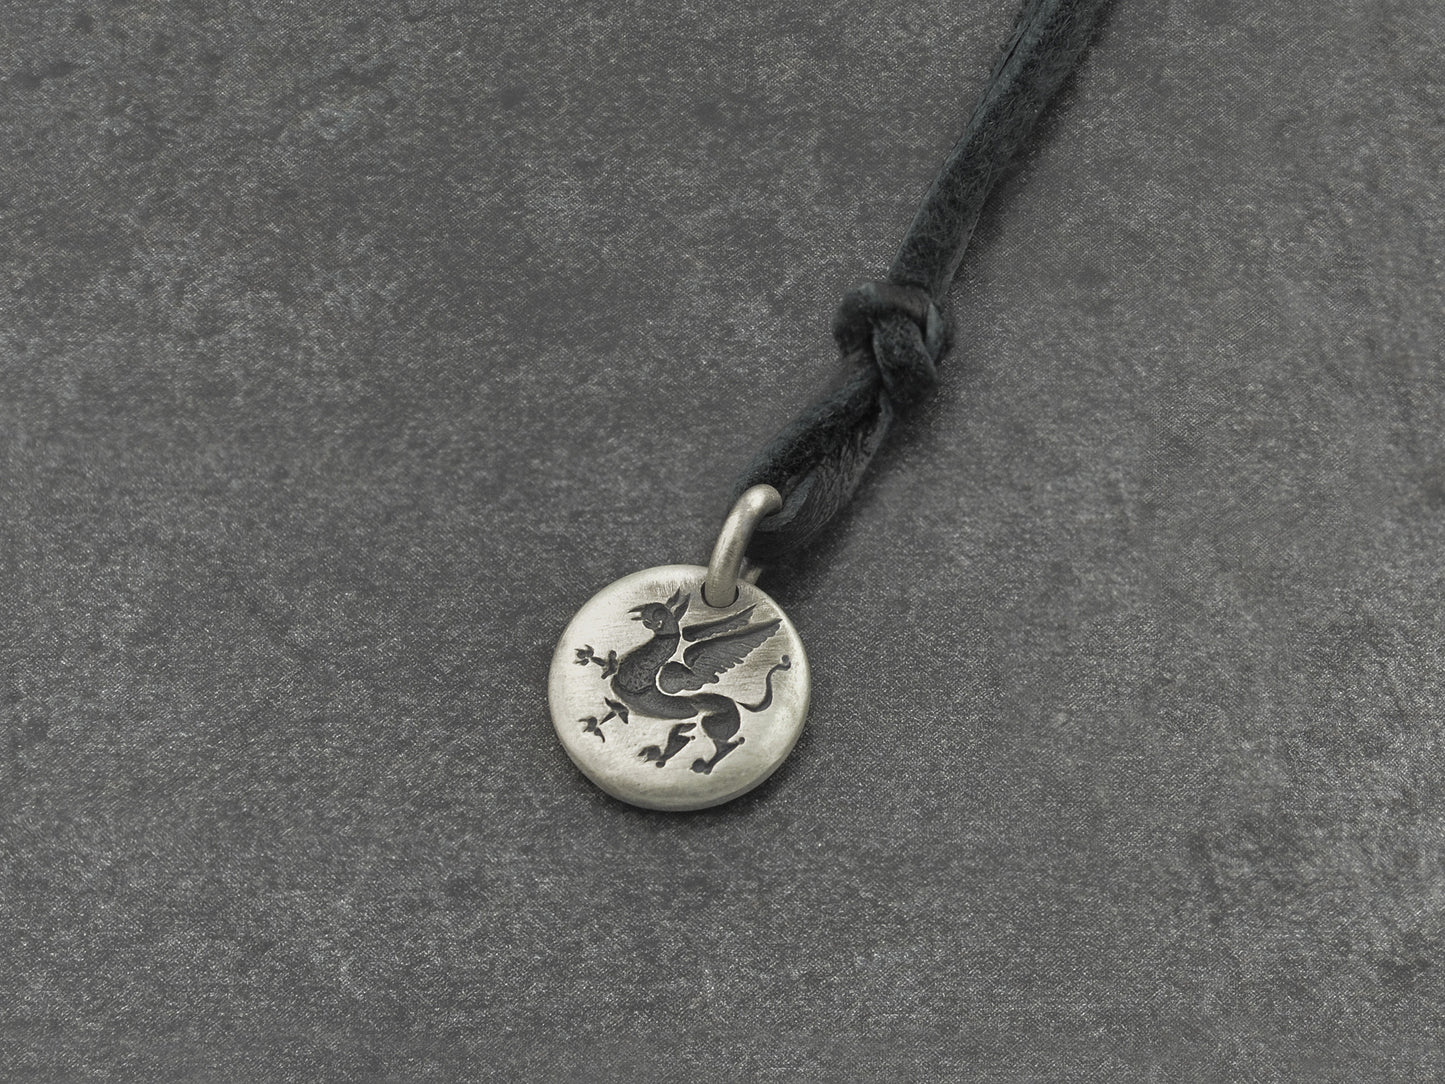 Griffin Charm Pendant in Sterling Silver